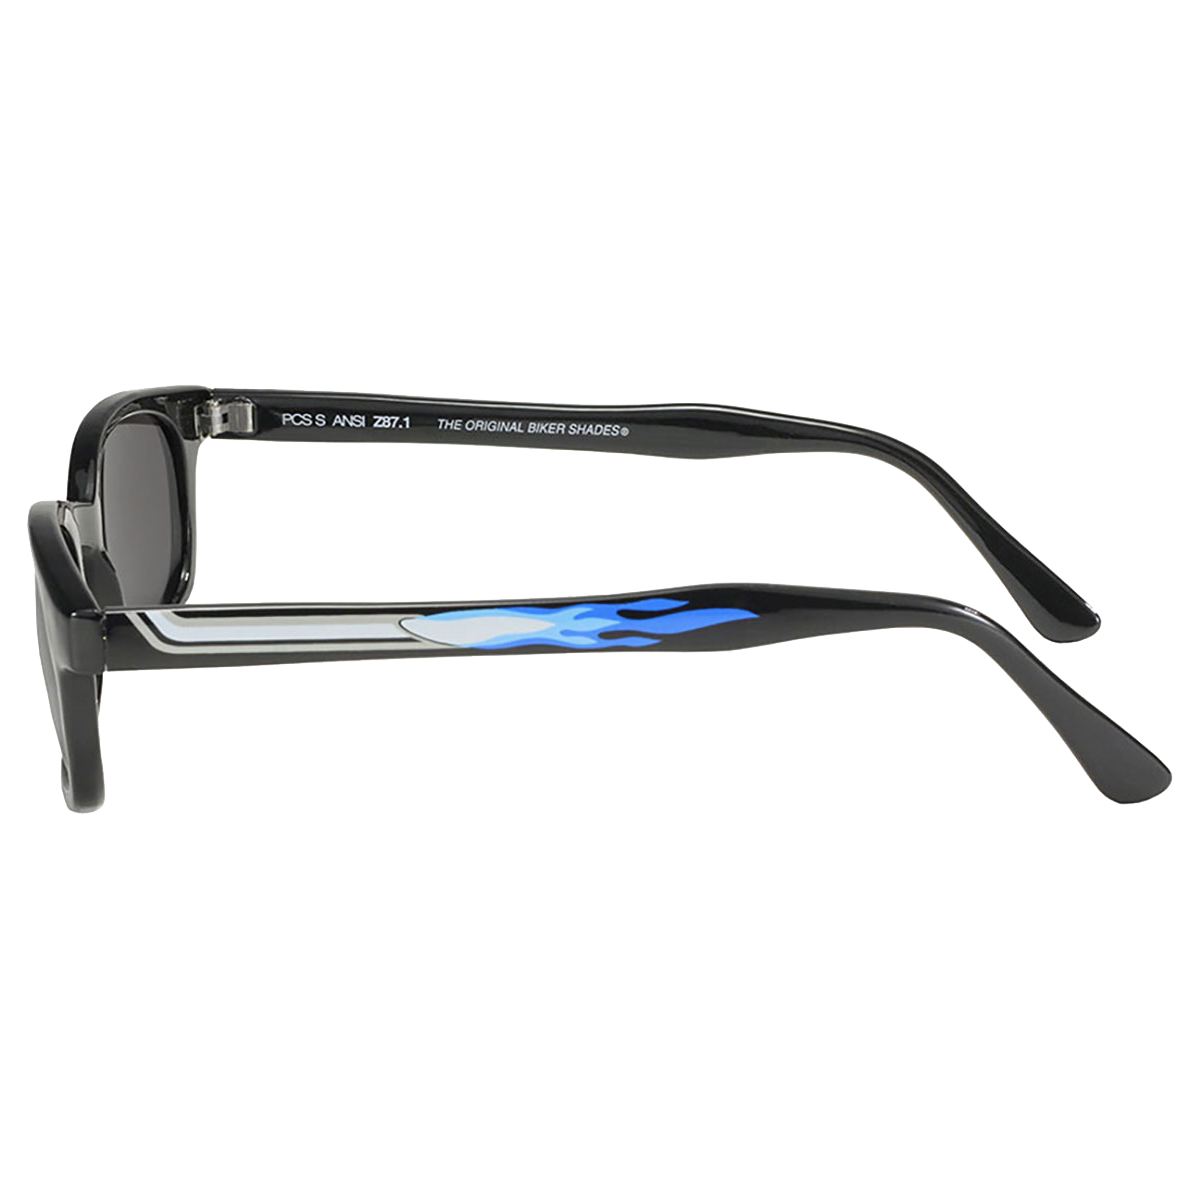 X-KD's 1227 - Exhaust pipe design frame - Sunglasses